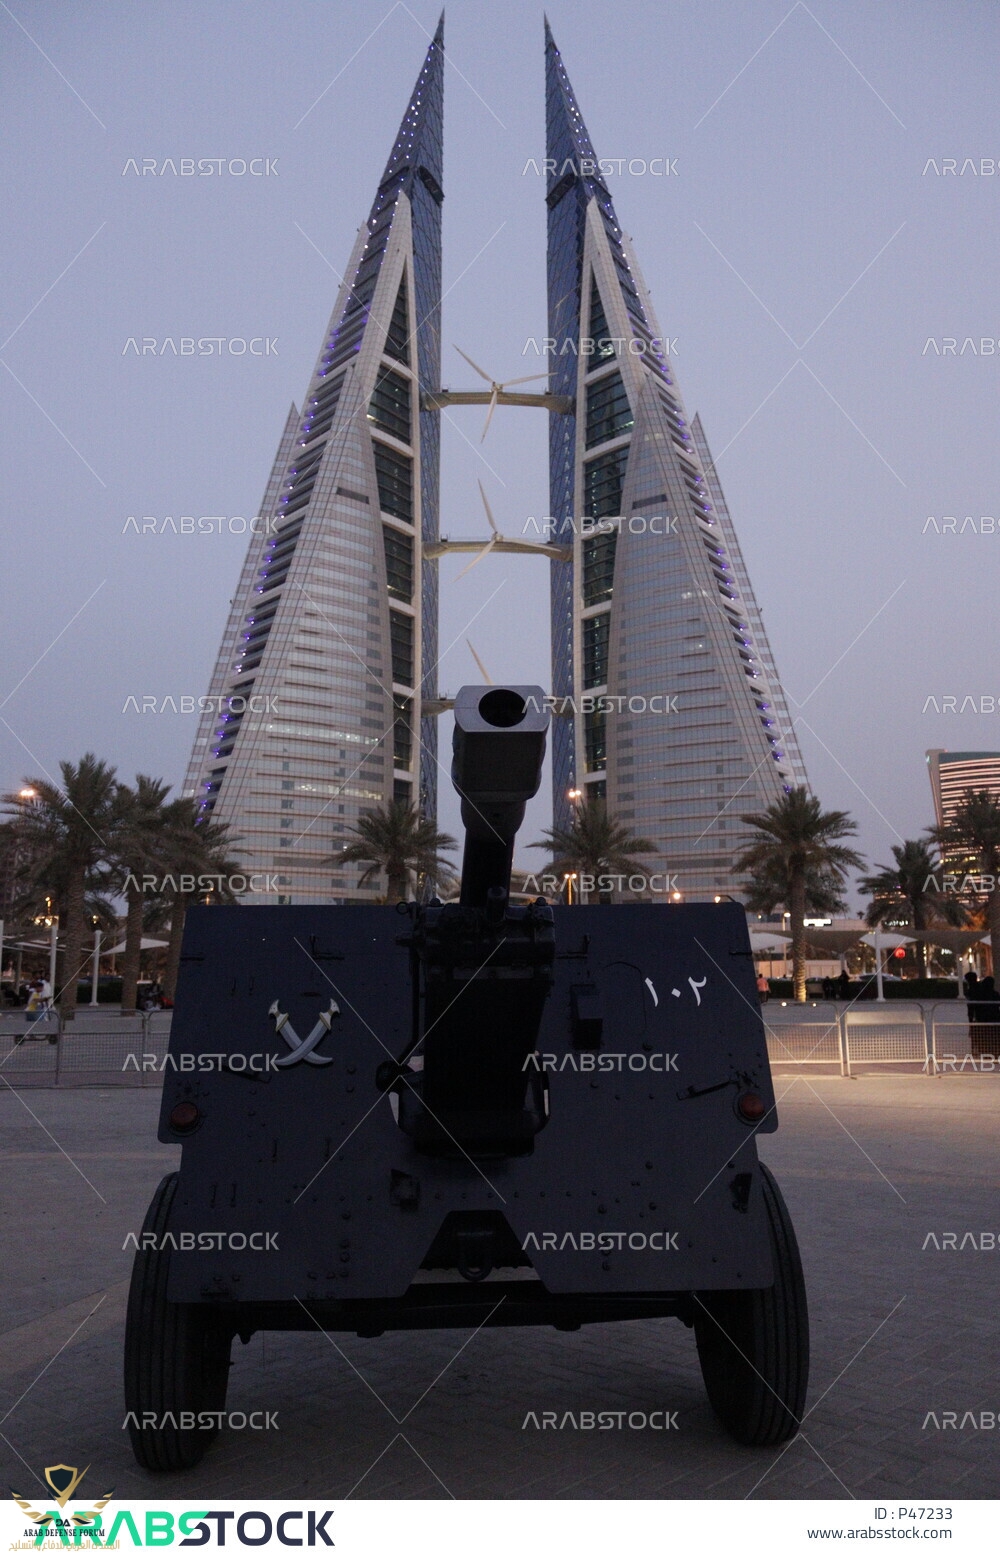 search_large-image-47233-picture-iftar-cannon-front-bahrain-world-trade-center-moda.jpg